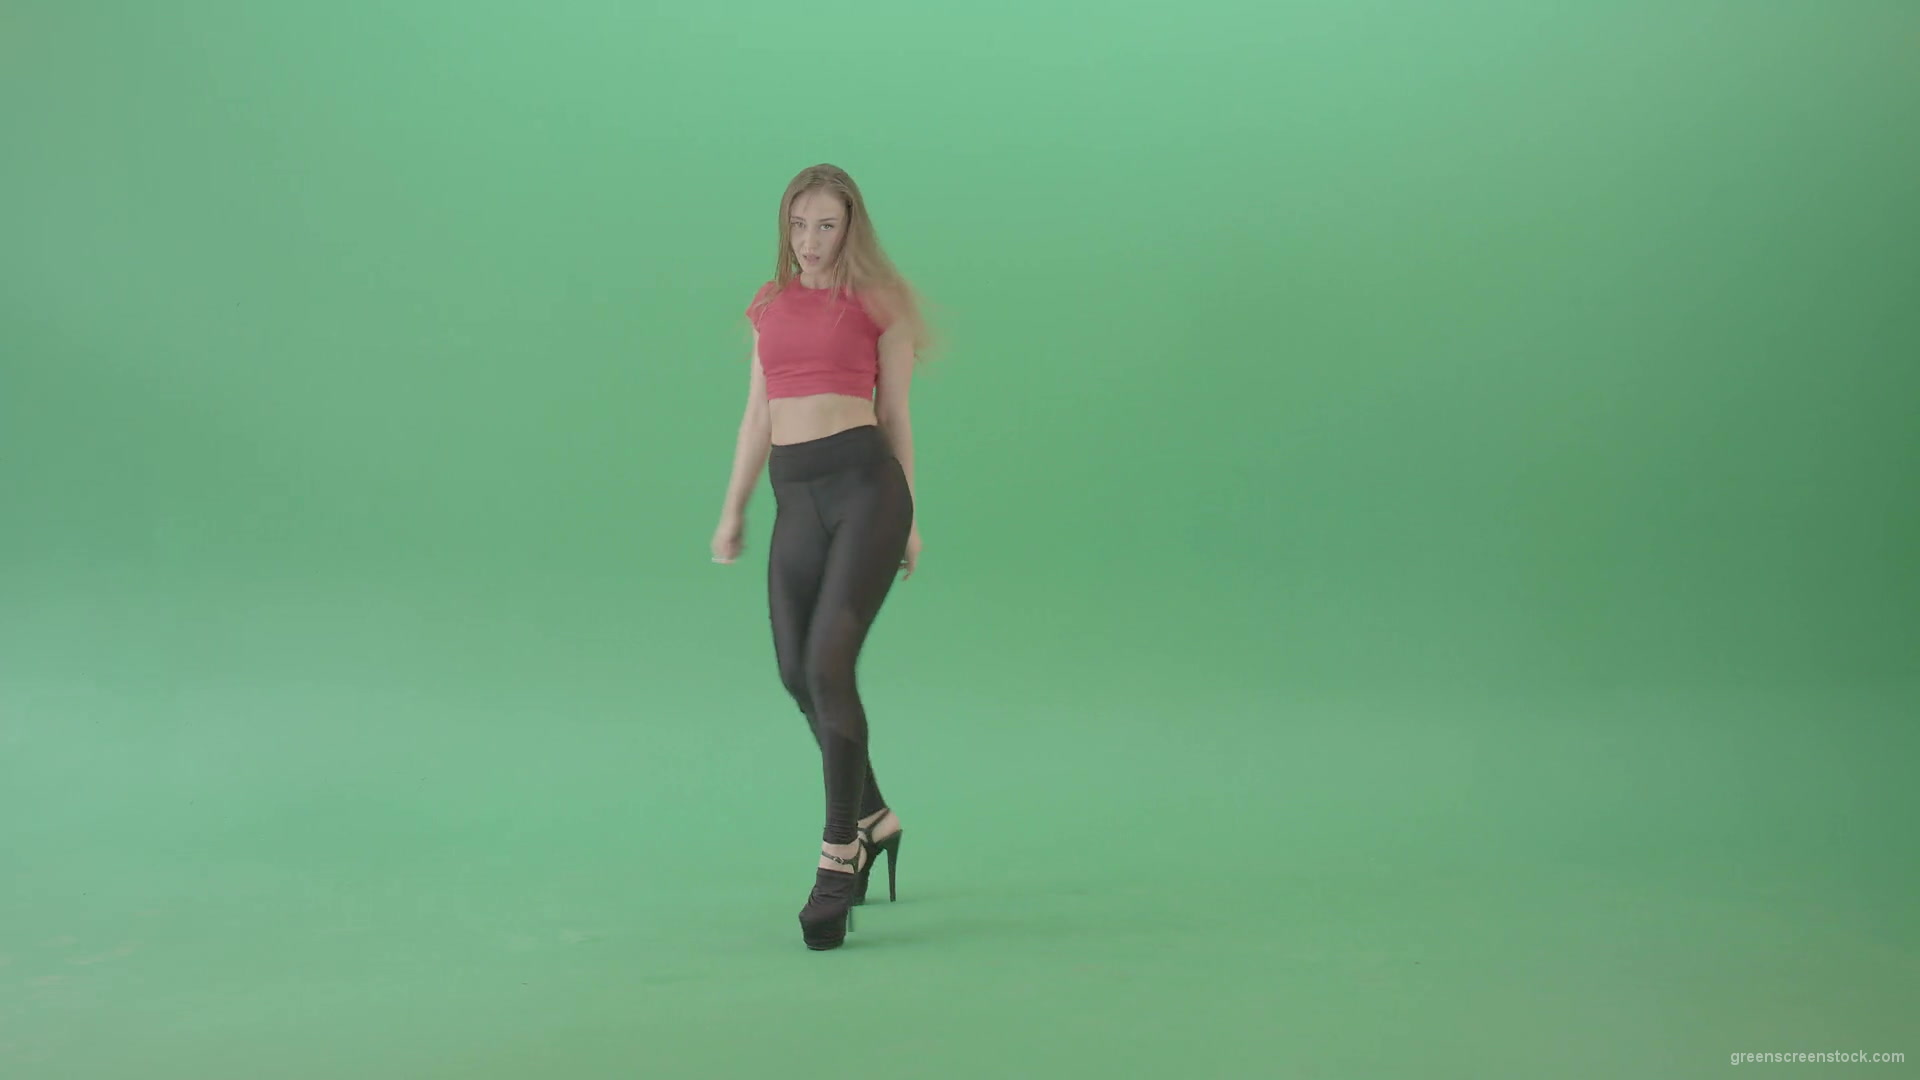 Young-woman-making-squat-on-green-screen-dancing-sexy-moves-4K-Video-Footage-1920_006 Green Screen Stock